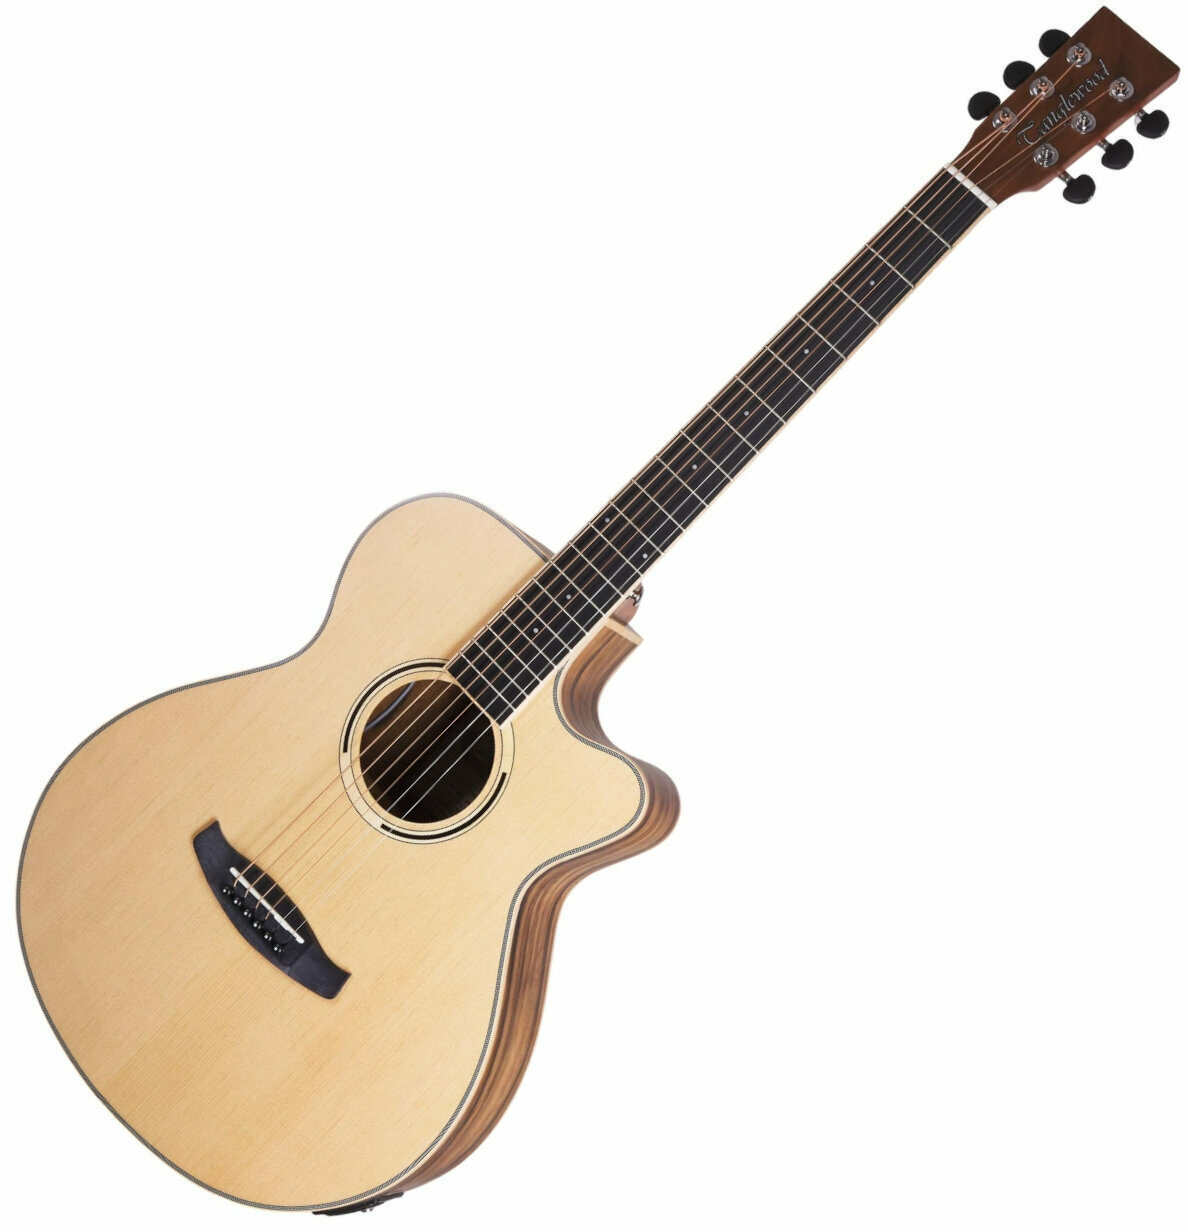 Electro-acoustic guitar Tanglewood DBT SFCE PW Natural Satin